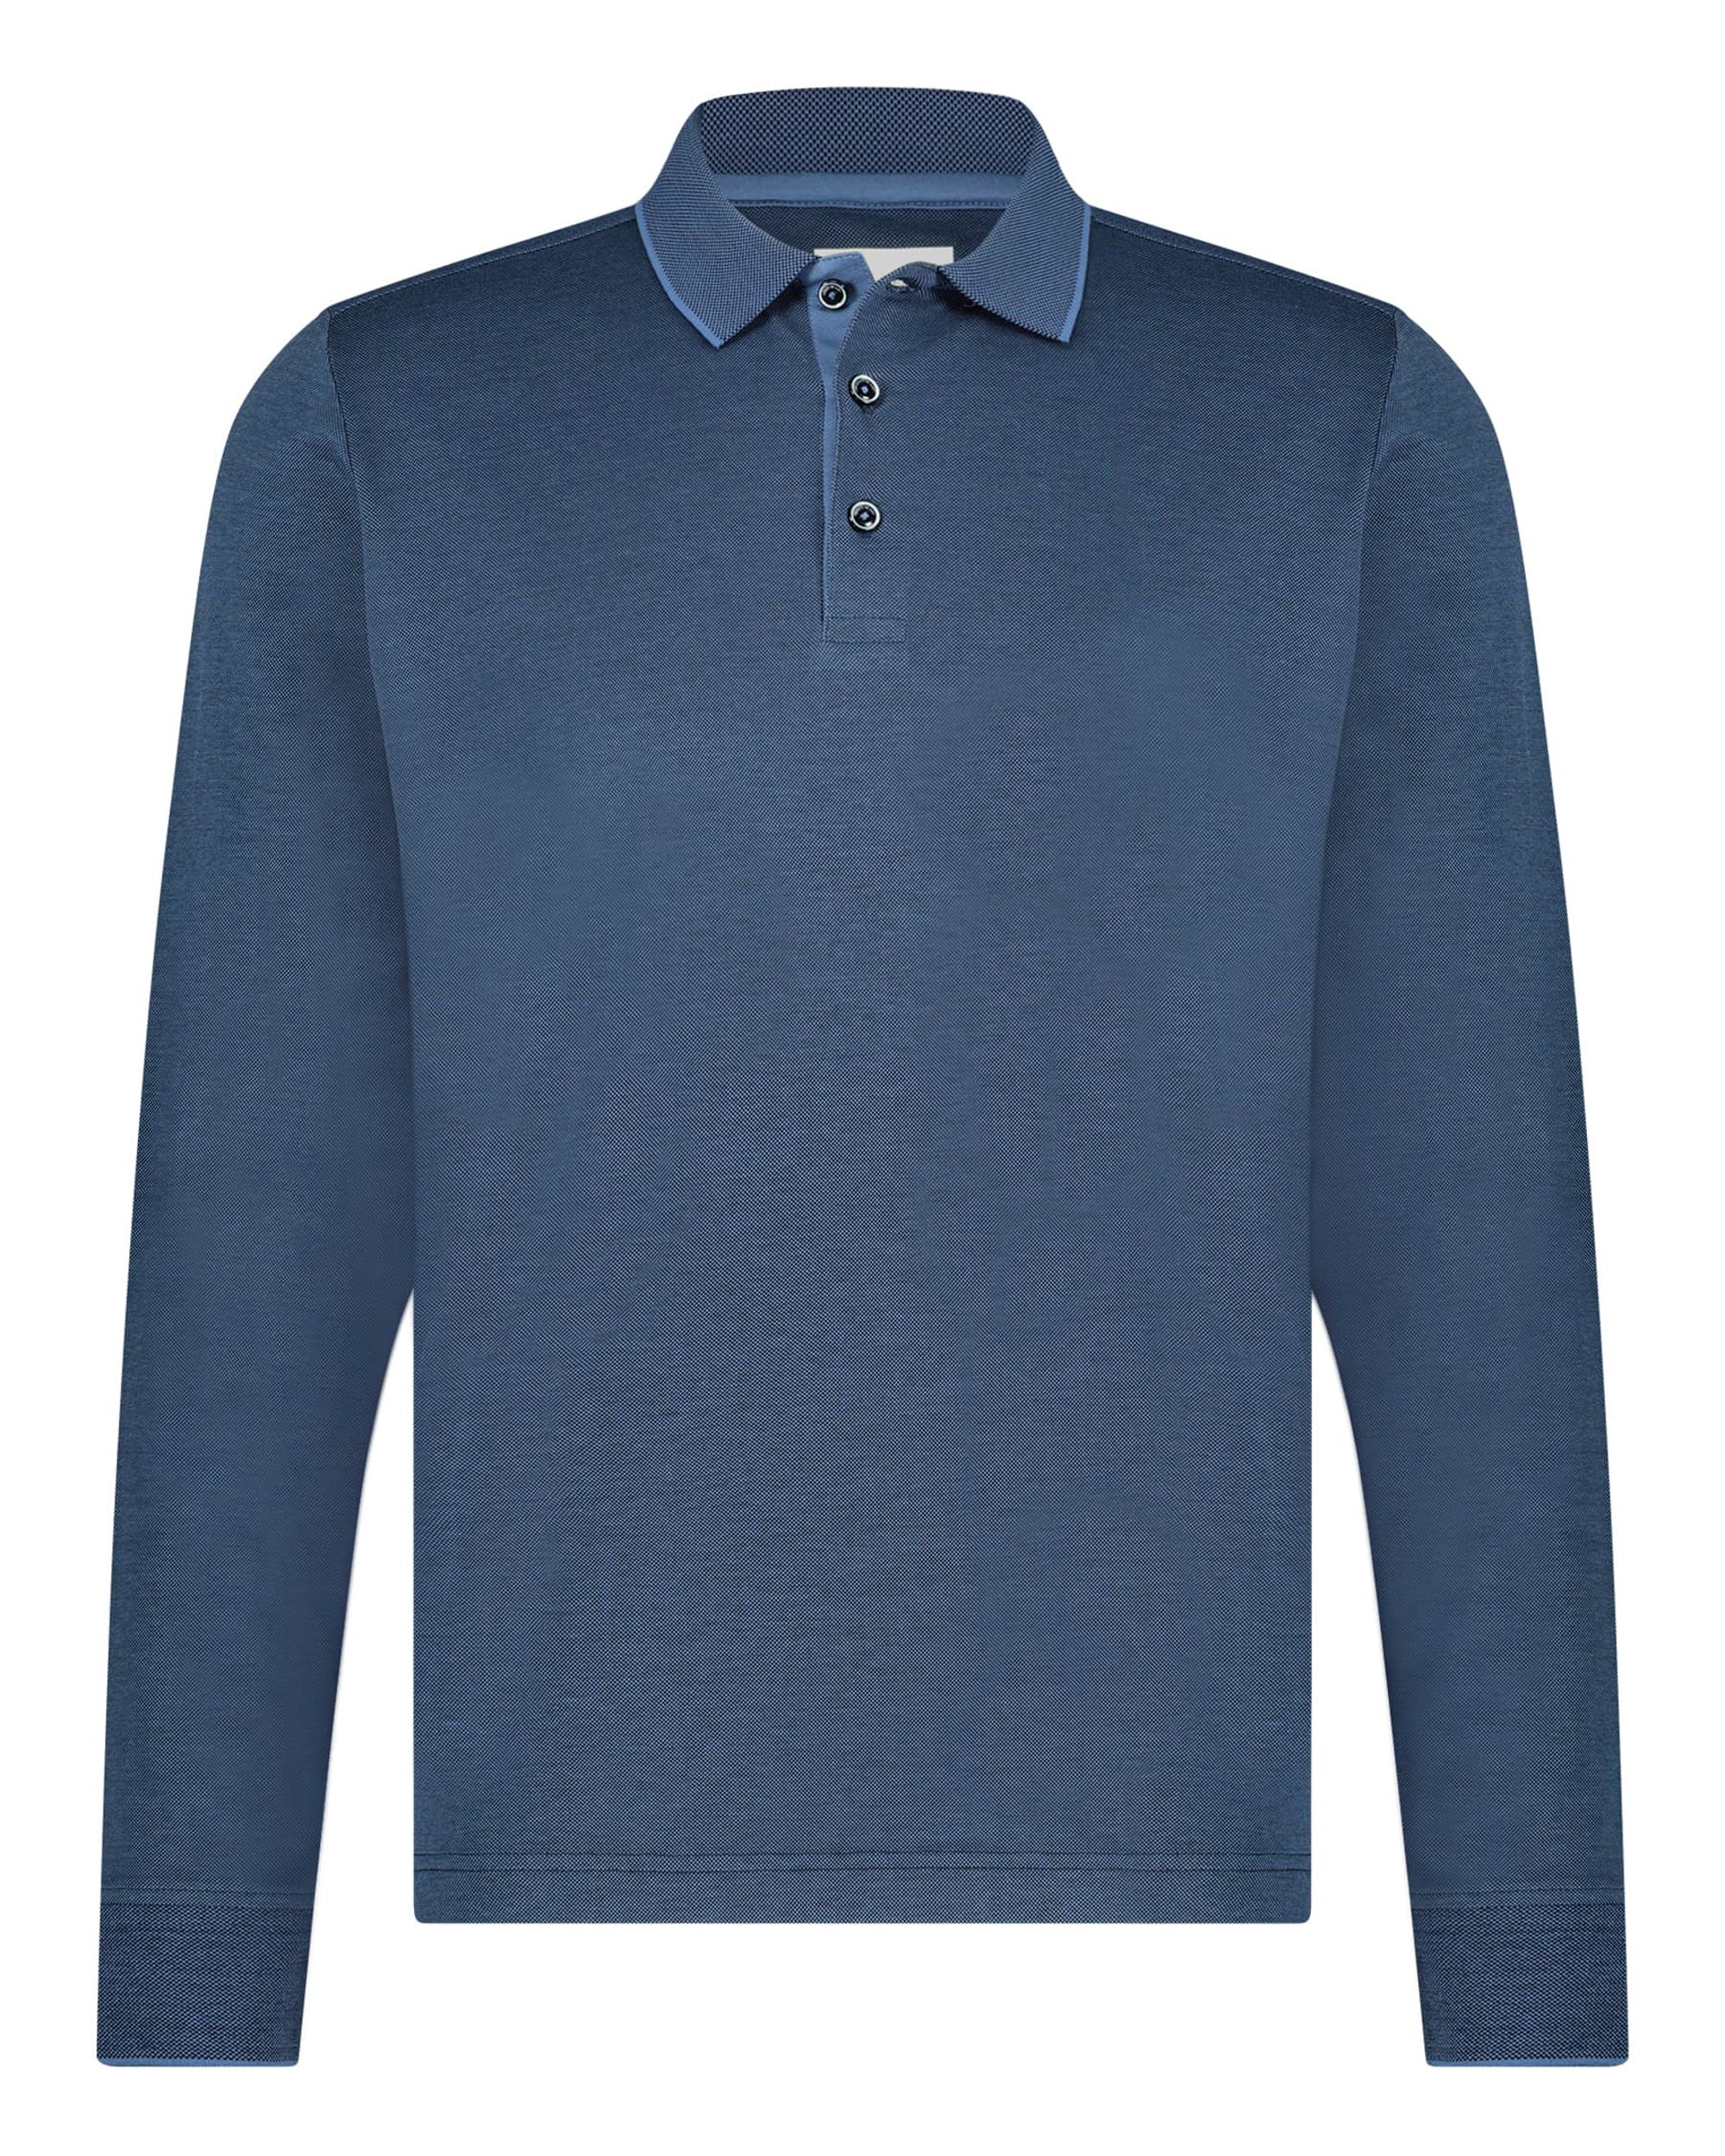 State of Art Polo LM Donker blauw 081202-001-4XL